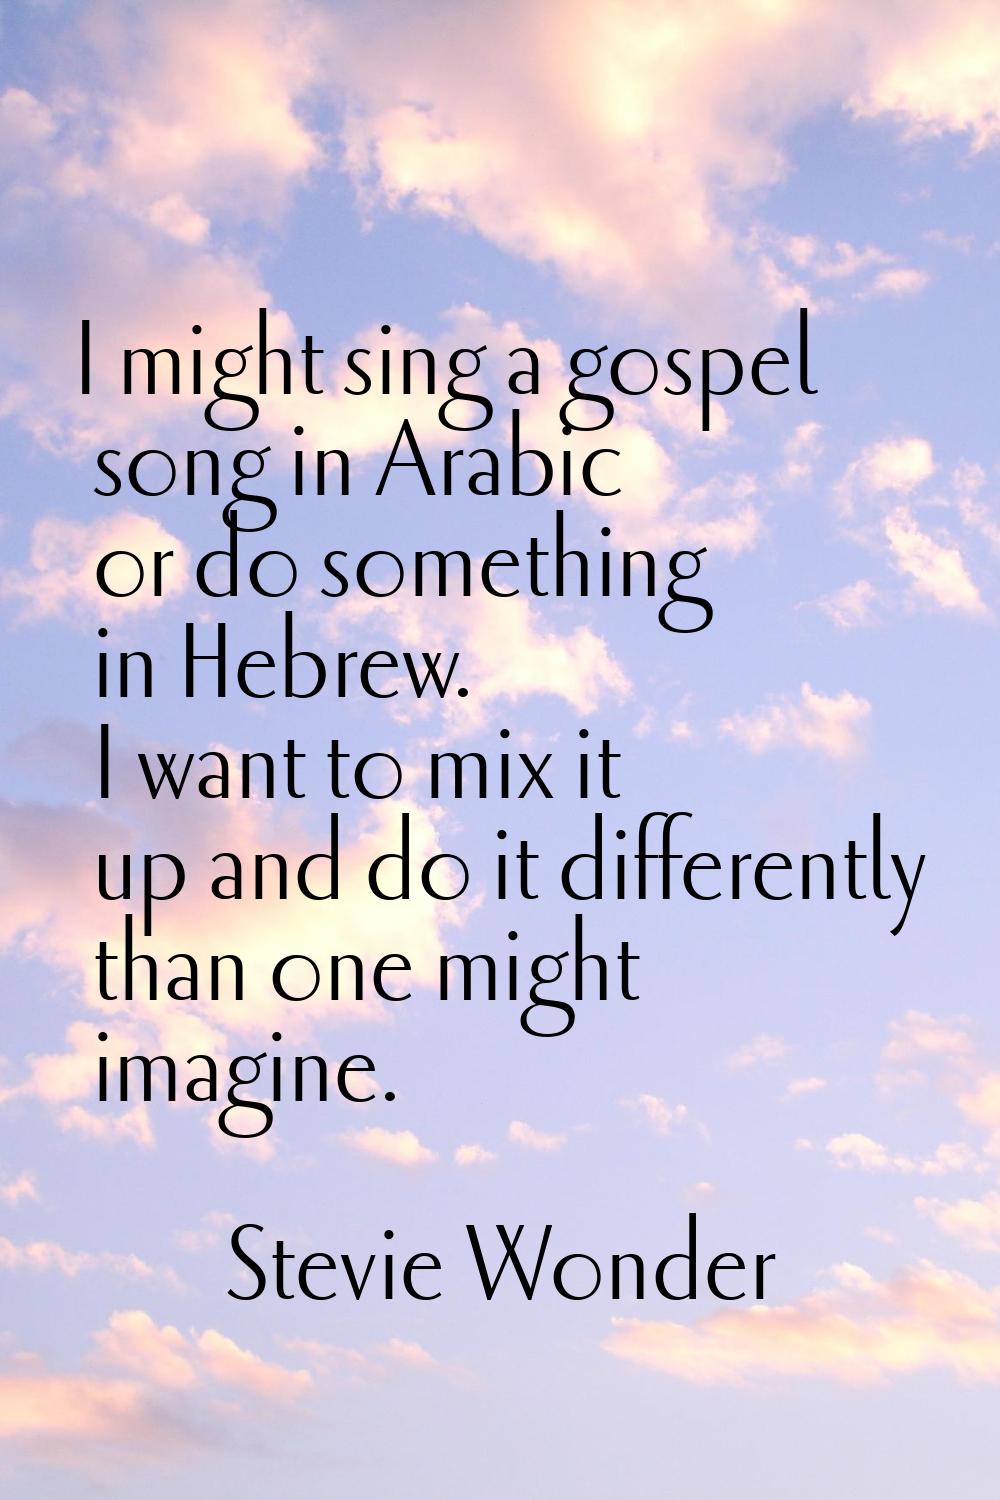 I might sing a gospel song in Arabic or do something in Hebrew. I want to mix it up and do it diffe